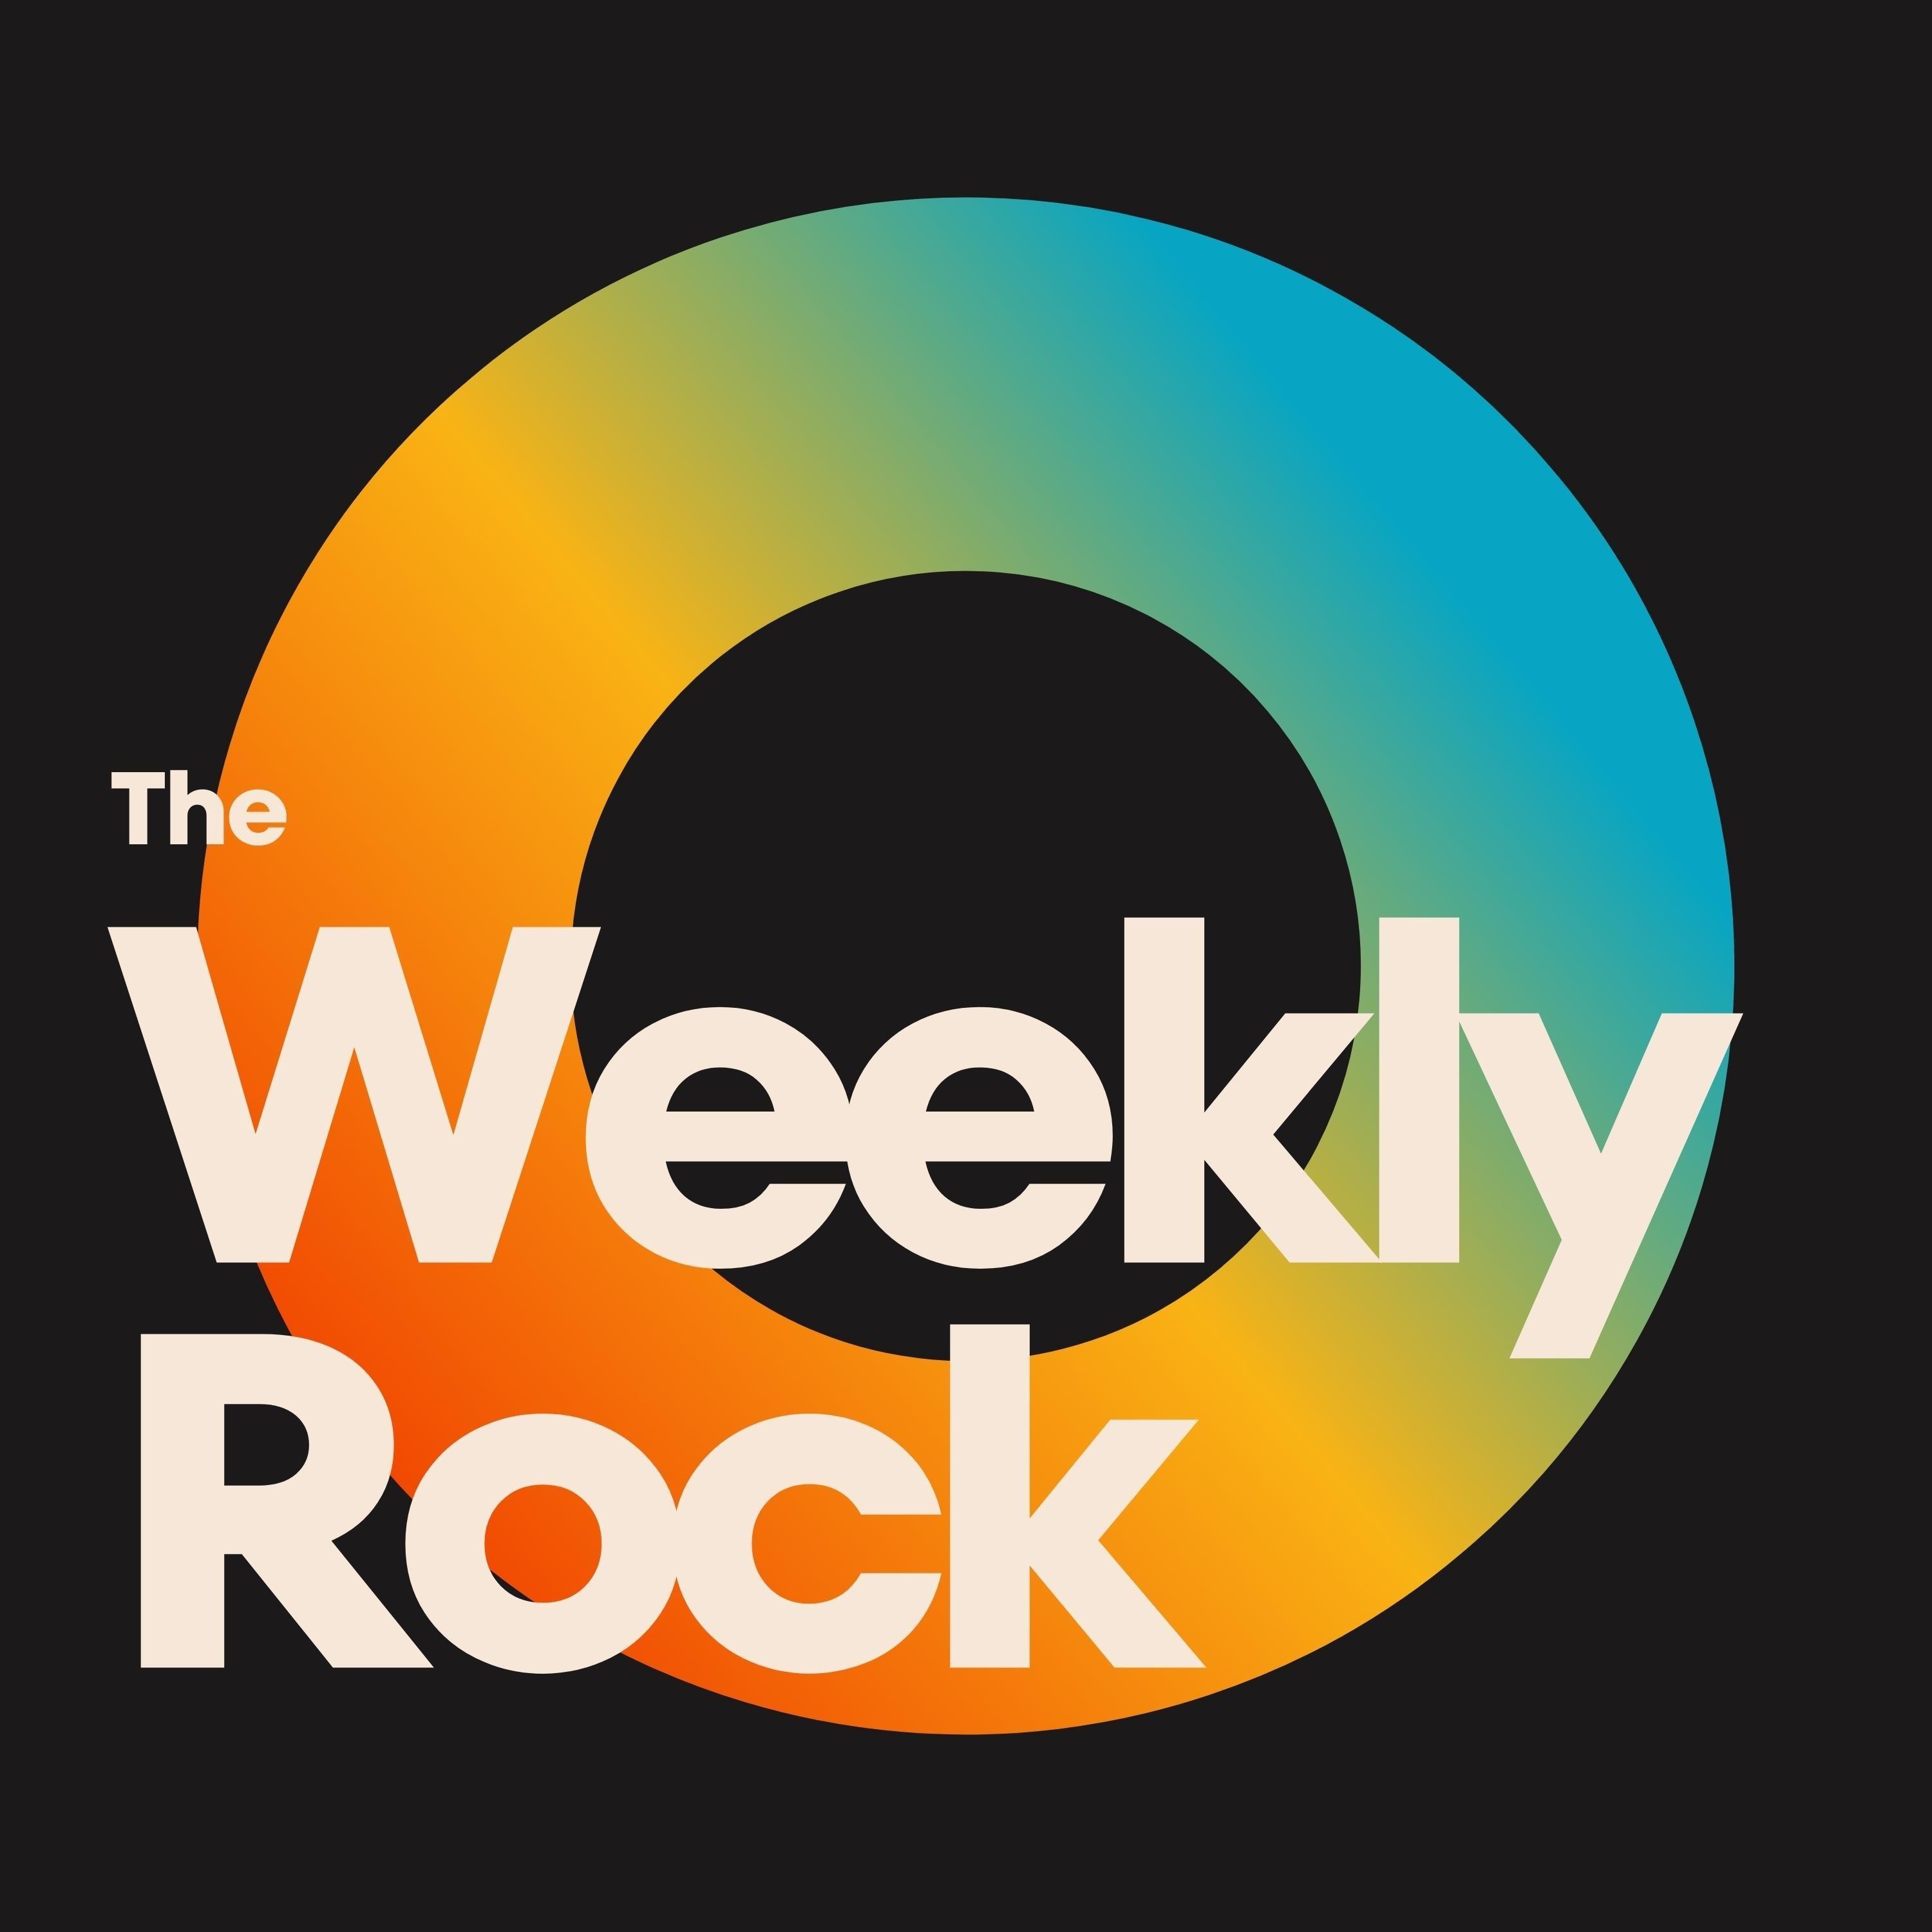 The Weekly Rock